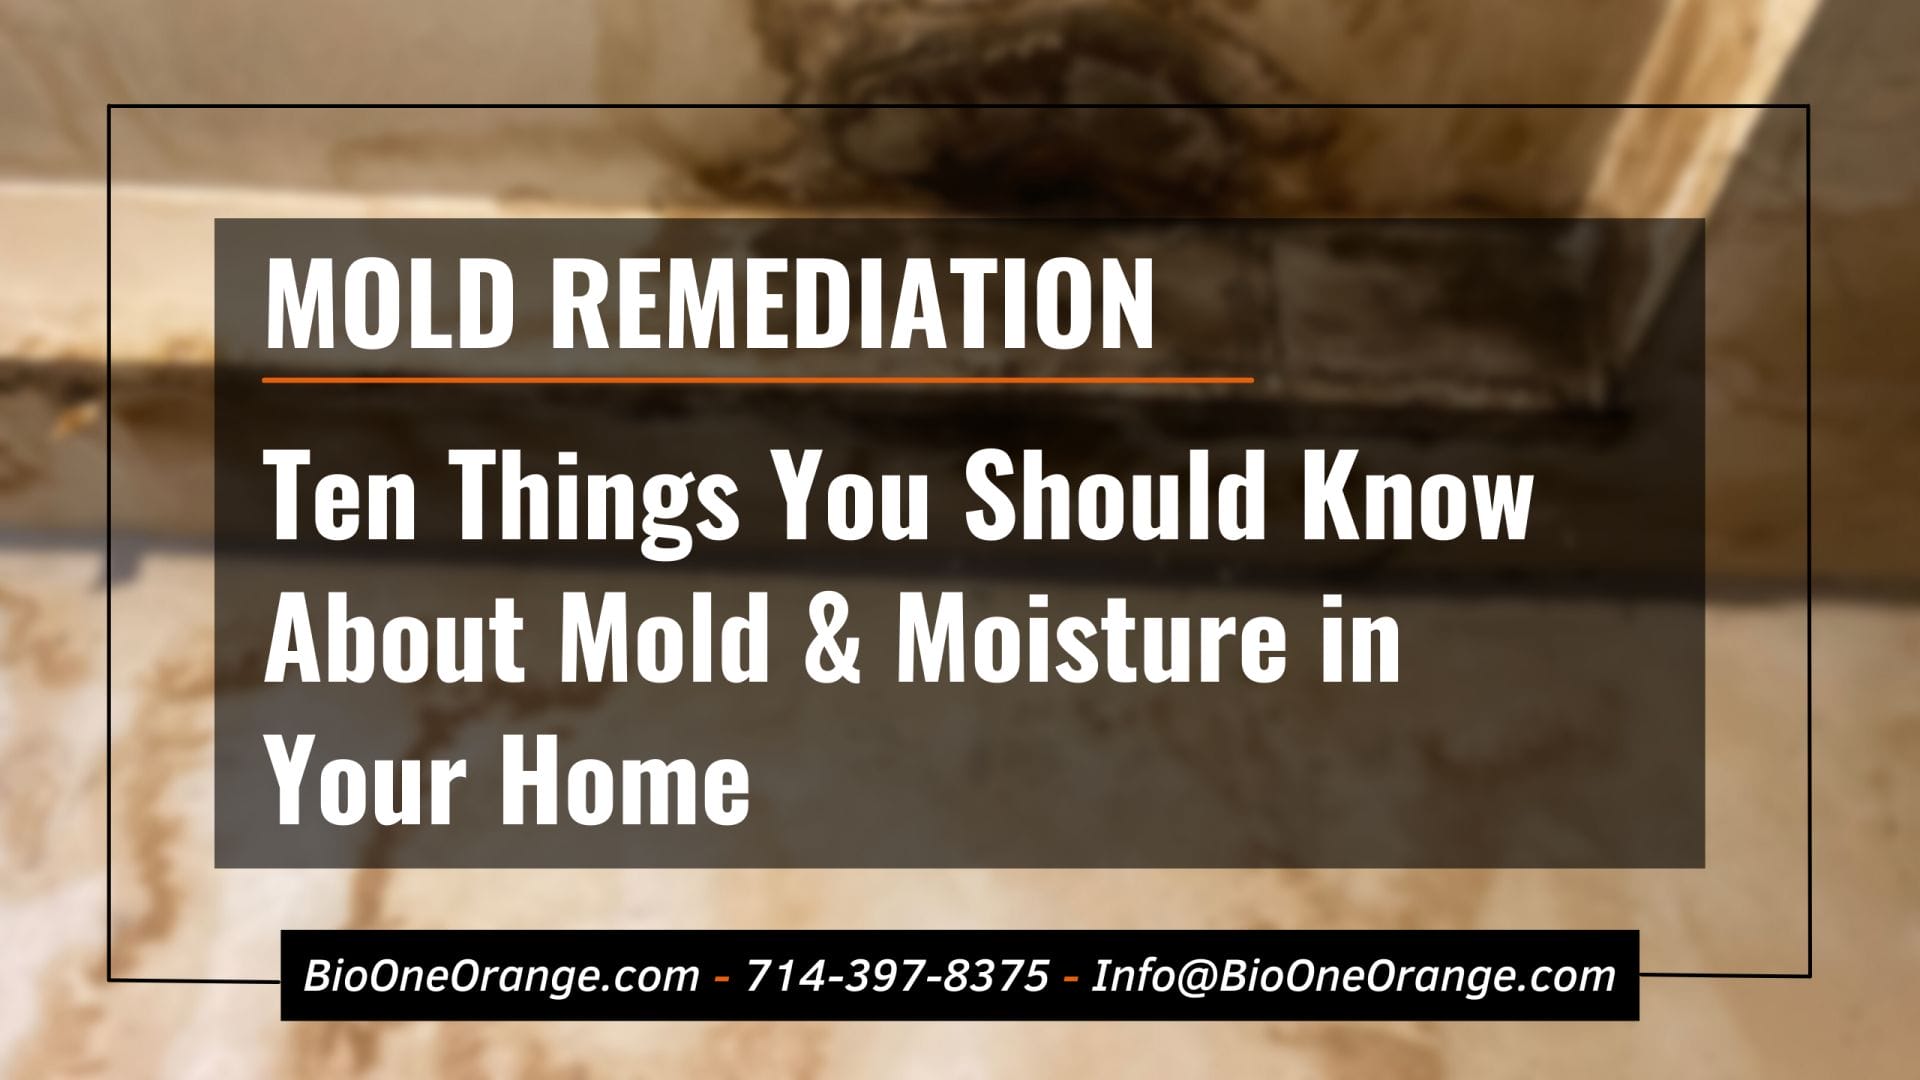 Ten Things You Should Know About Mold & Moisture in Your Home